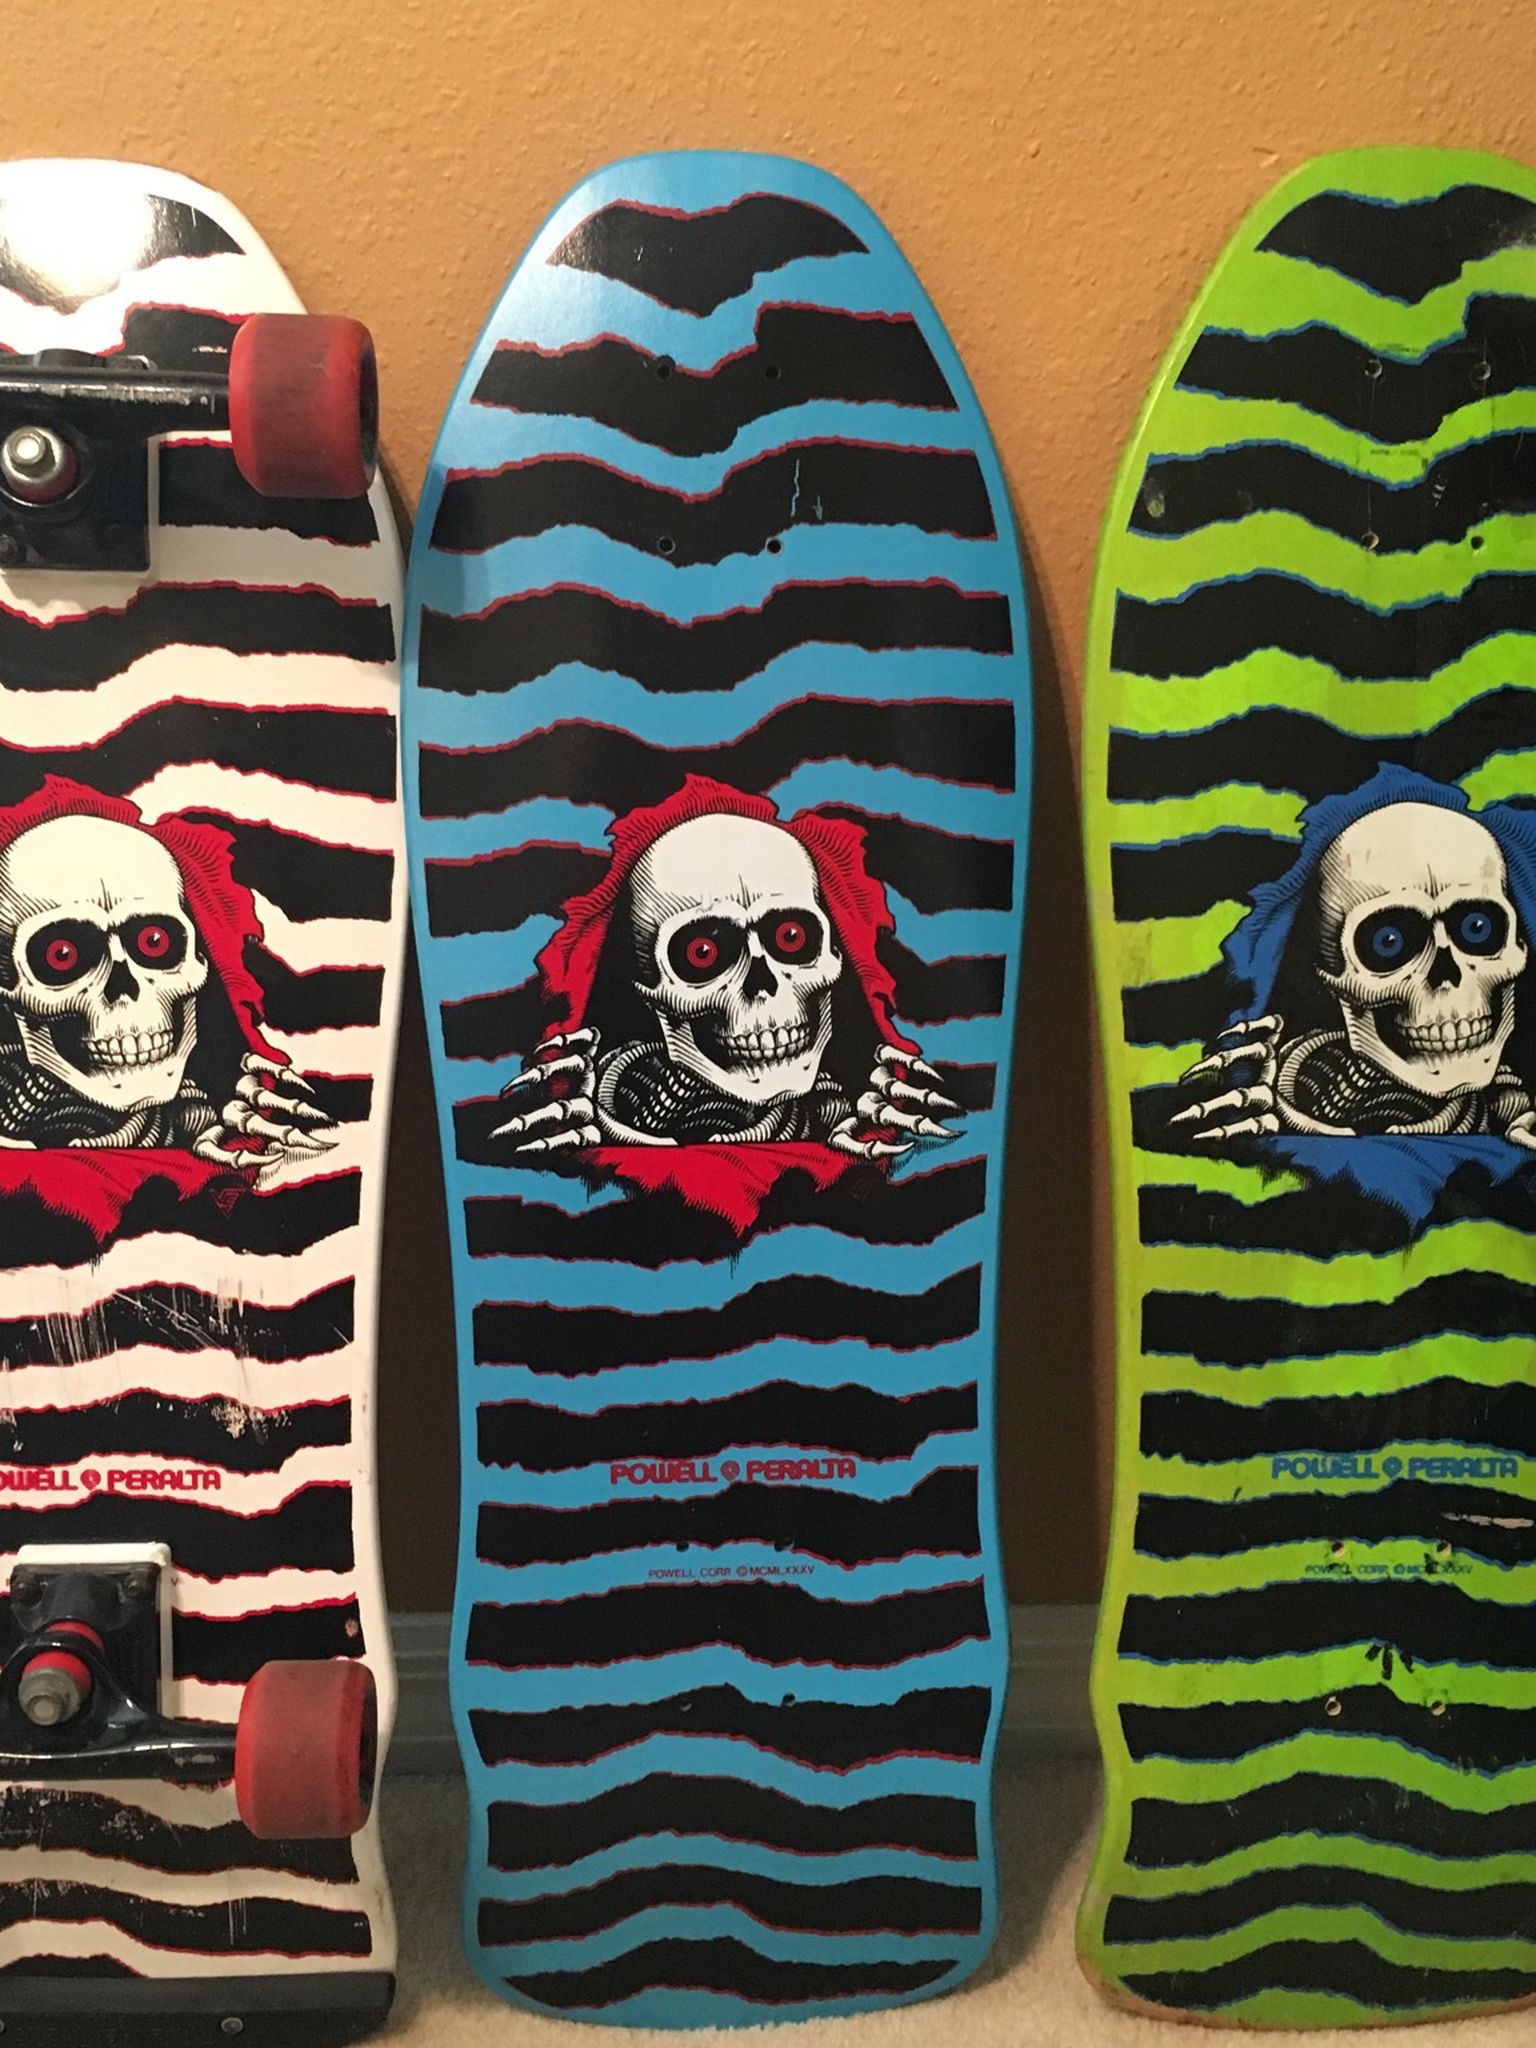 Have Trades And Cash For Old Skateboards